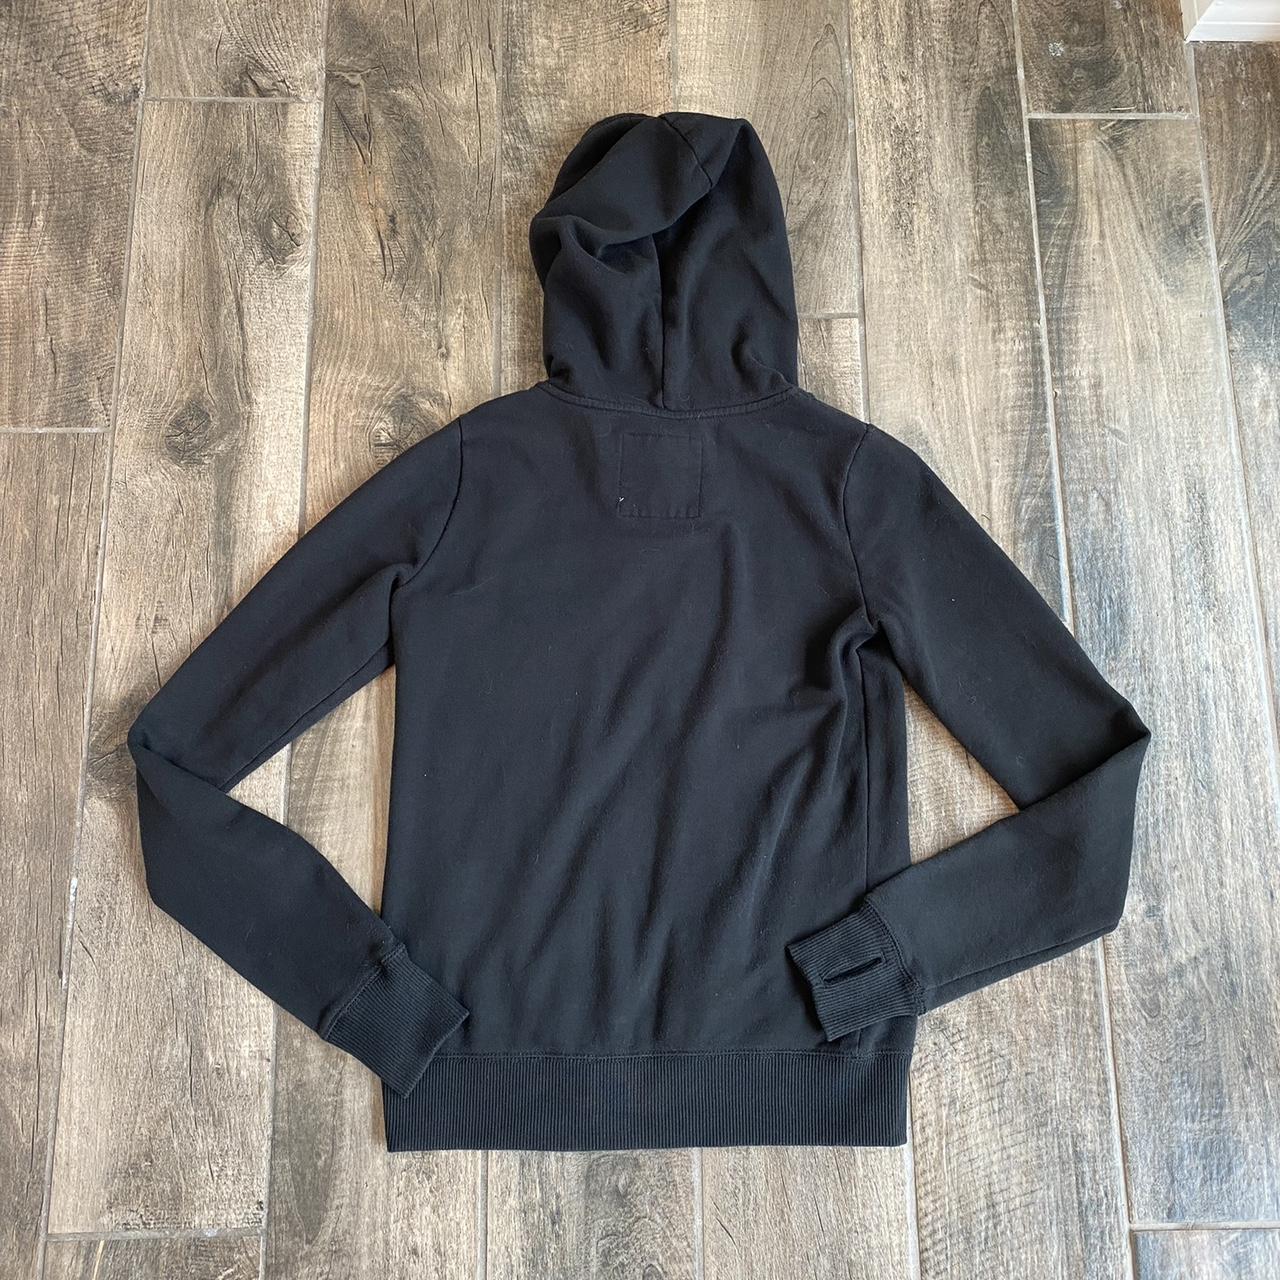 Hollister all-weather hooded jacket Zippered down - Depop